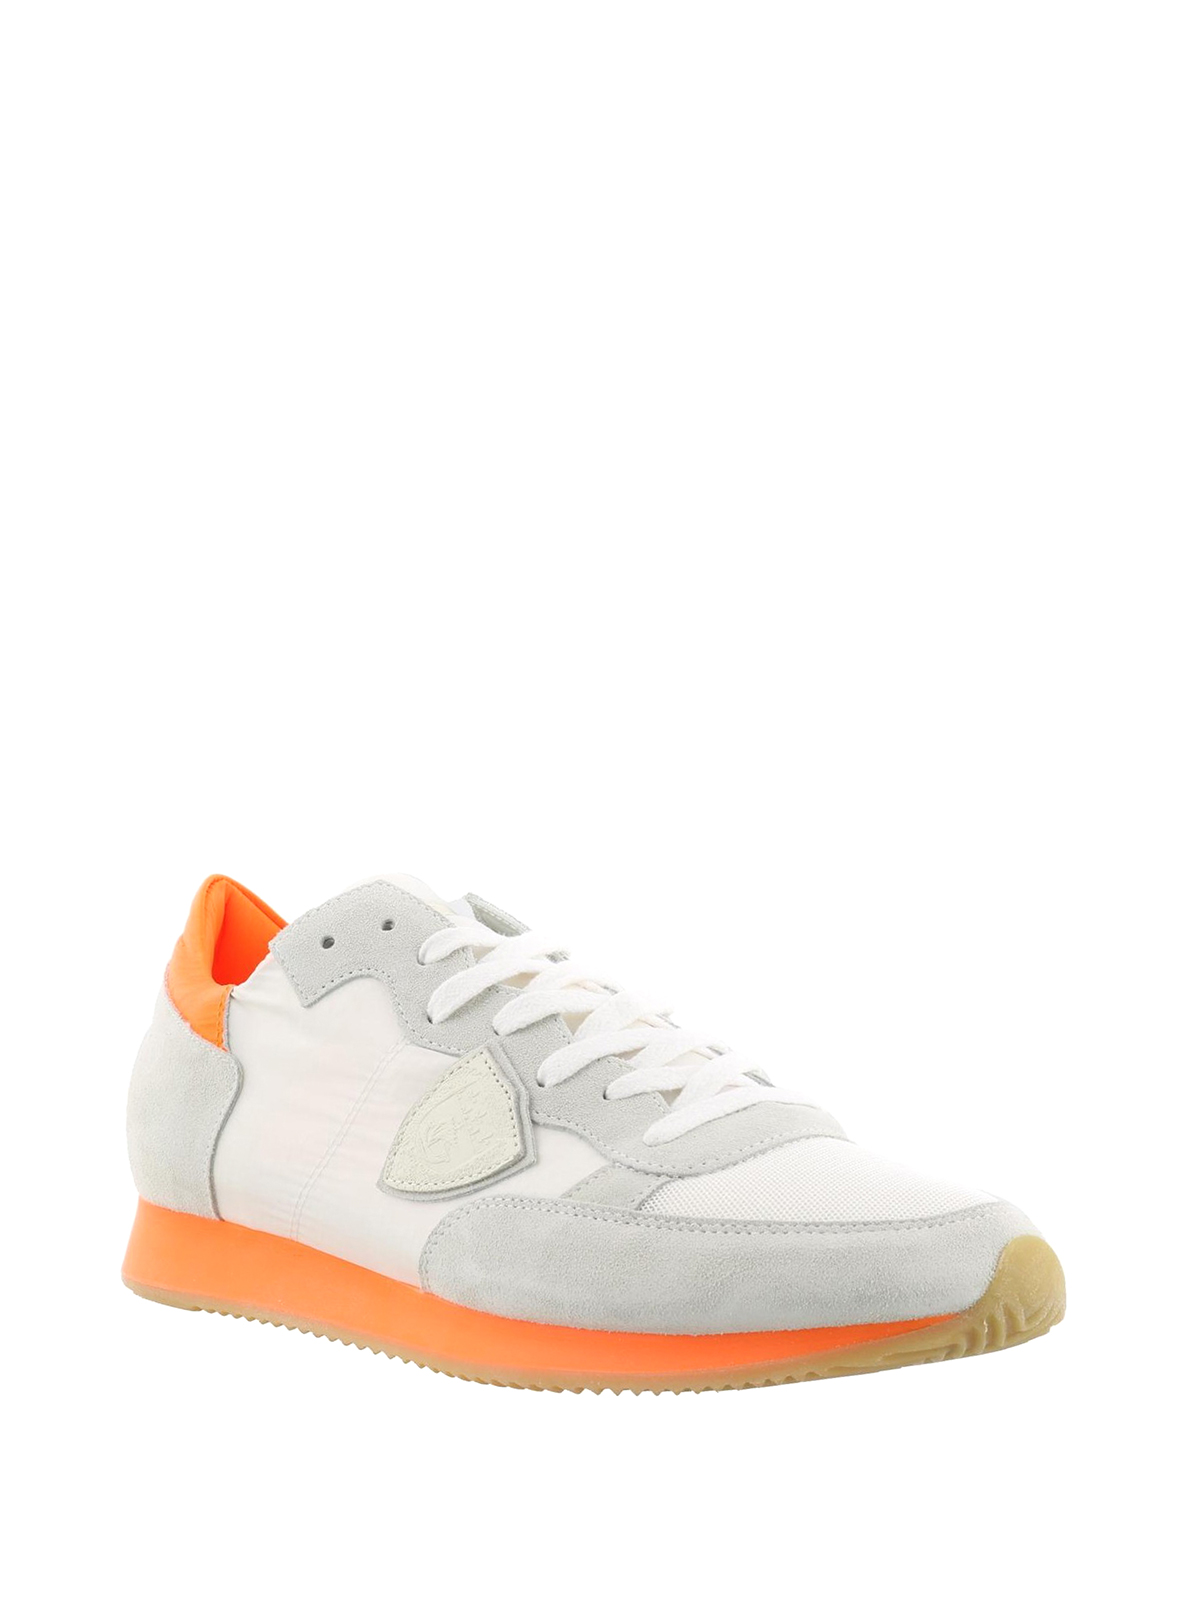 Trainers Philippe Model - Tropez sneakers with orange sole - TRLUNS02